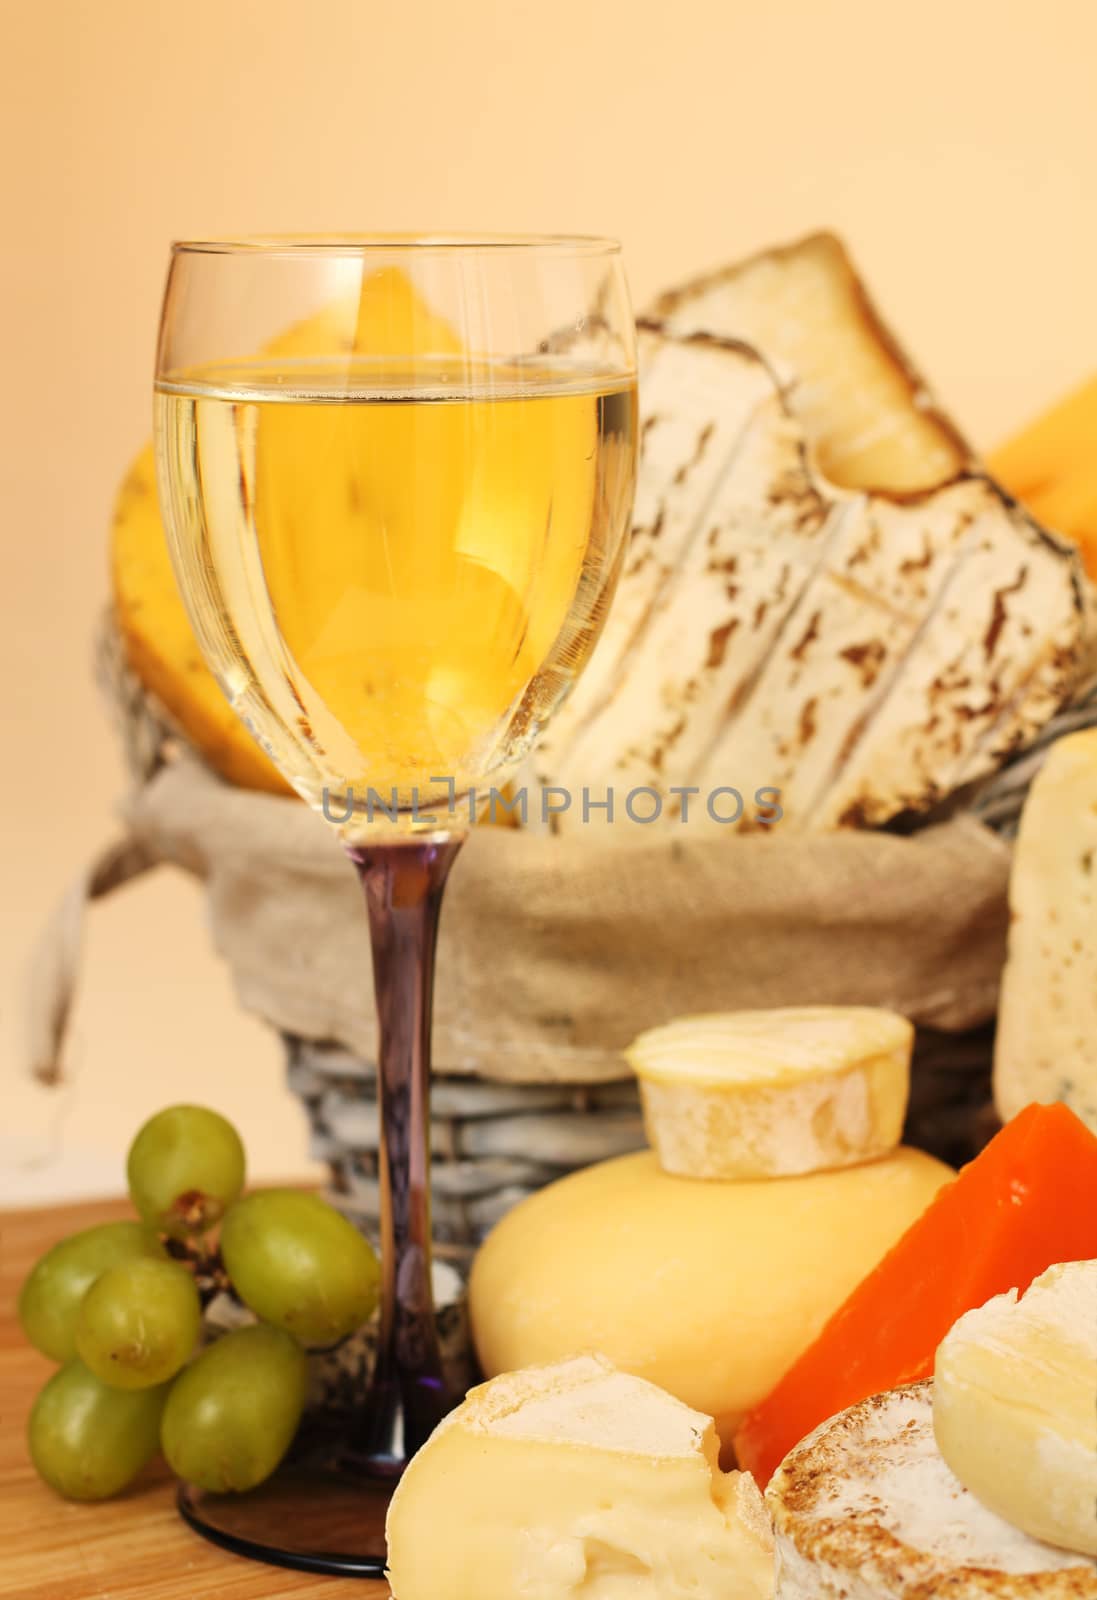 Cheese and wine by destillat